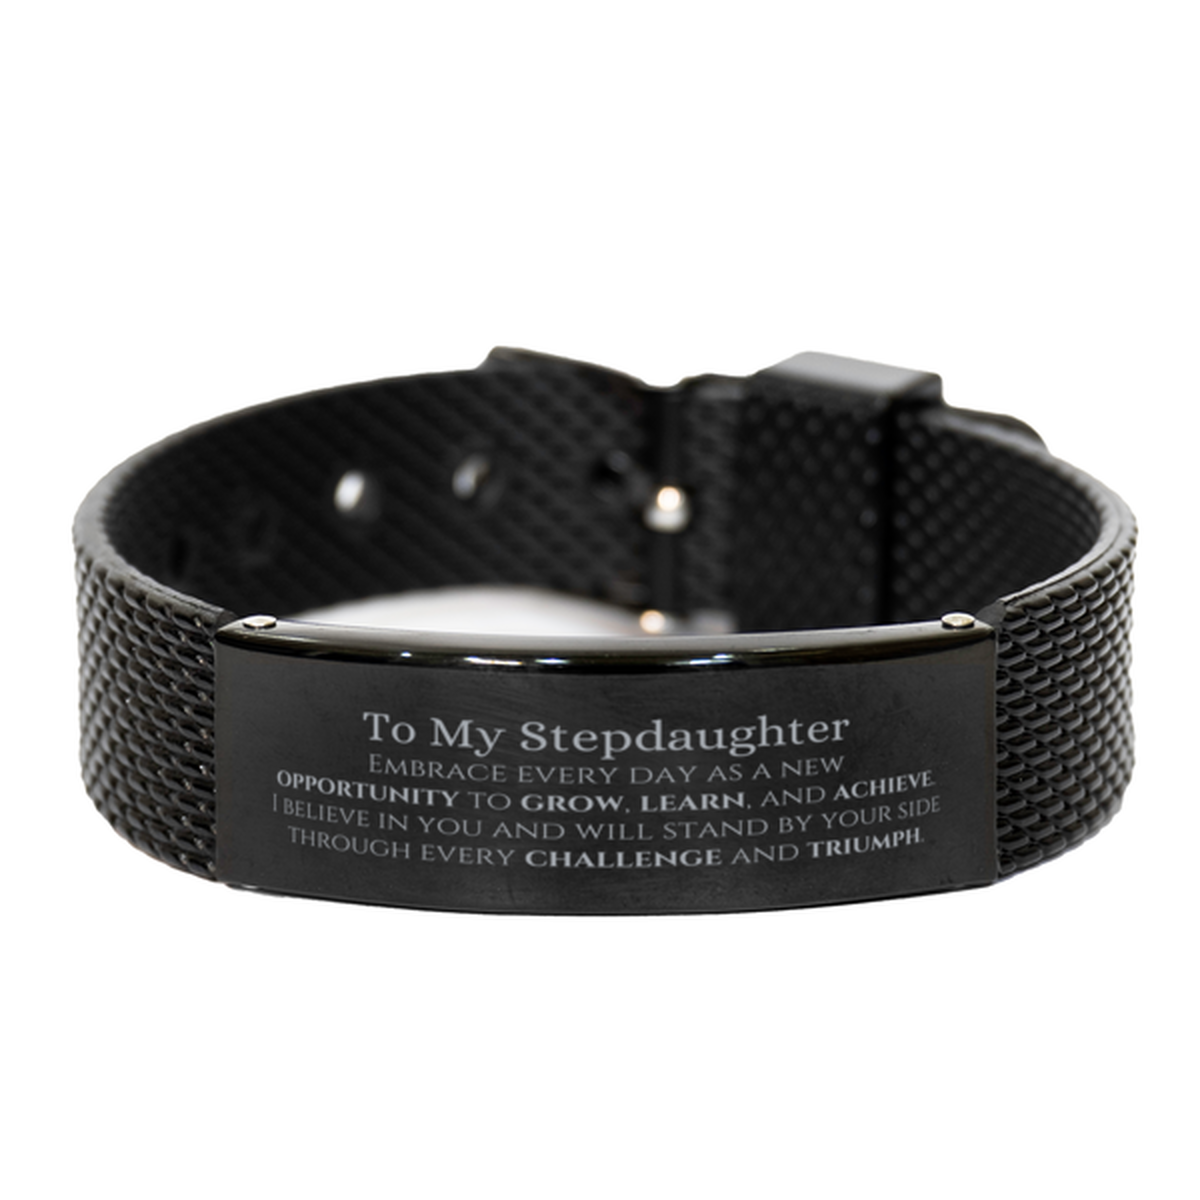 To My Stepdaughter Gifts, I believe in you and will stand by your side, Inspirational Black Shark Mesh Bracelet For Stepdaughter, Birthday Christmas Motivational Stepdaughter Gifts